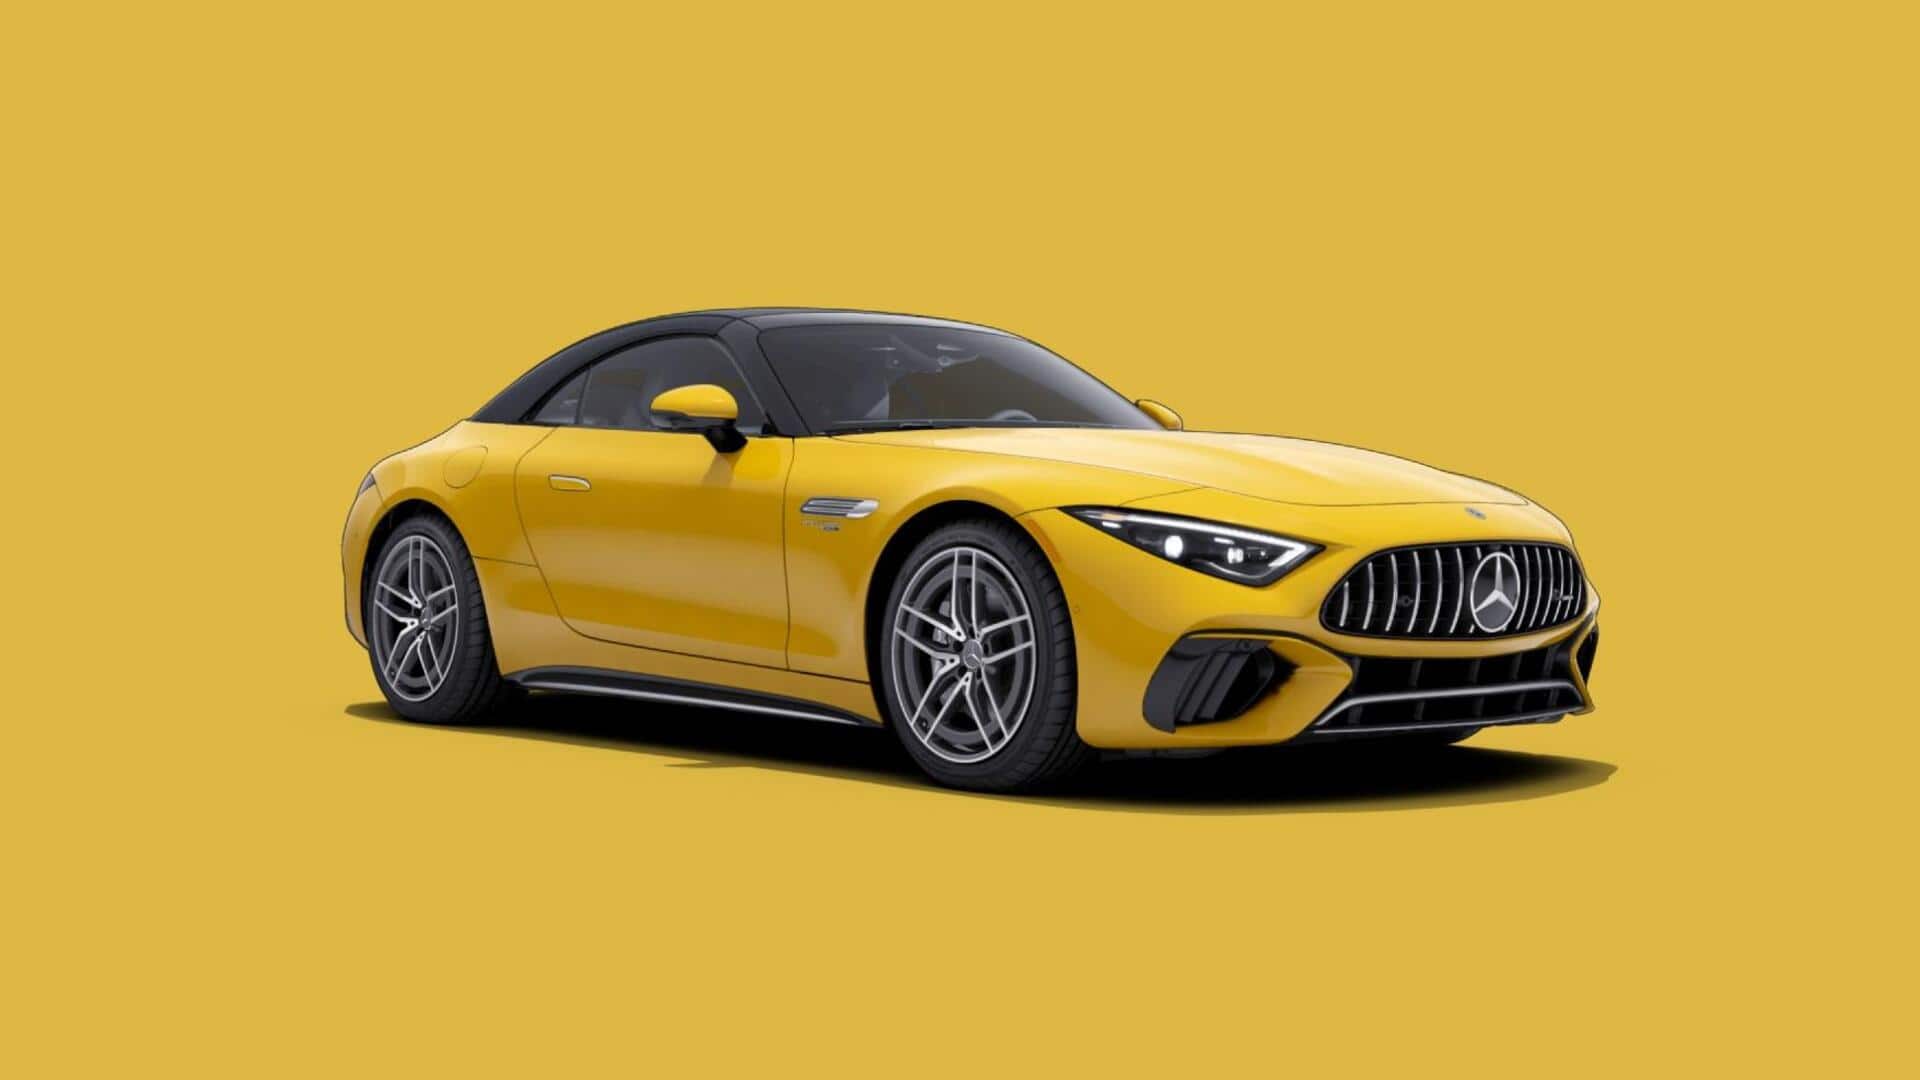 Mercedes-AMG SL 55 4MATIC+ Roadster launched at Rs. 2.35 crore